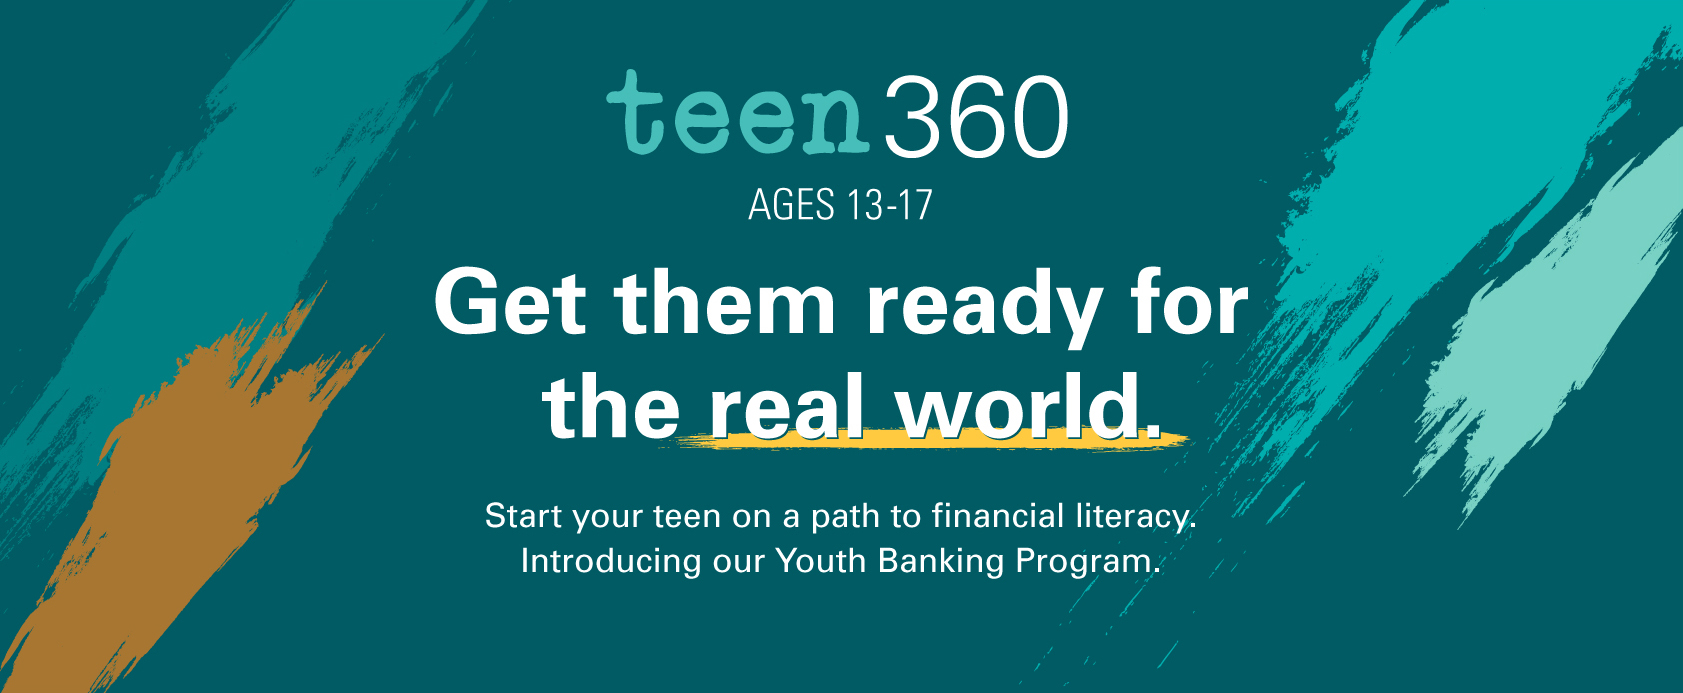 Teen360 ages 13 -17 